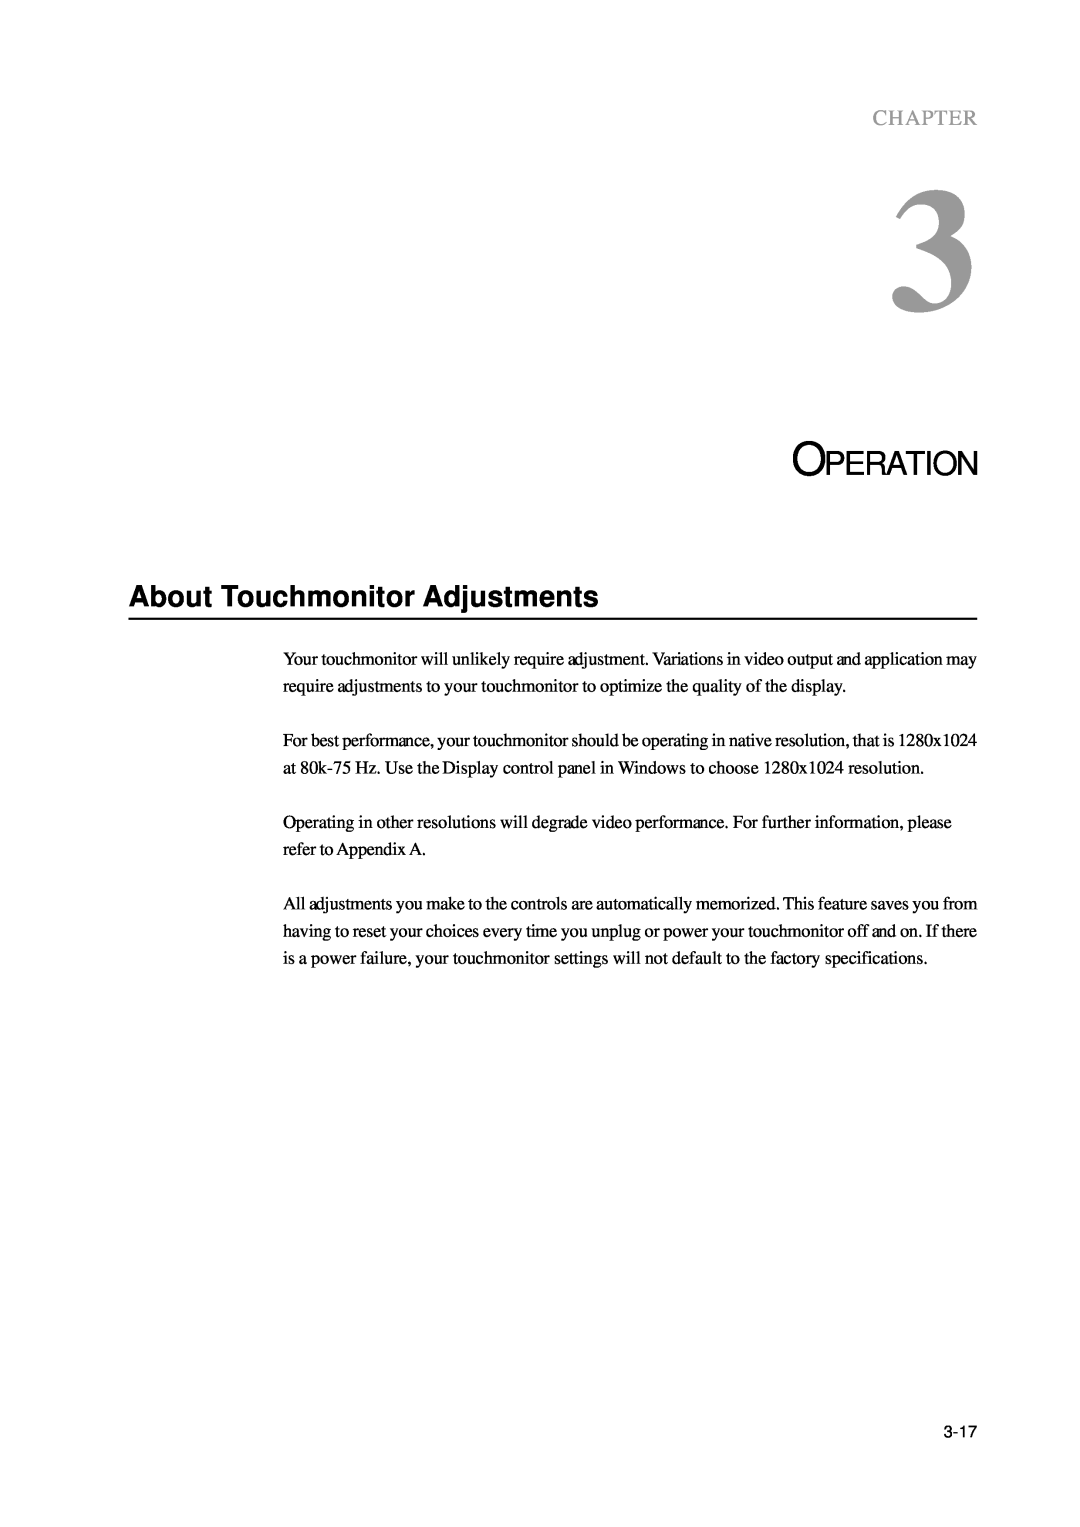 Elo TouchSystems 1000 Series manual Operation, About Touchmonitor Adjustments, Chapter 